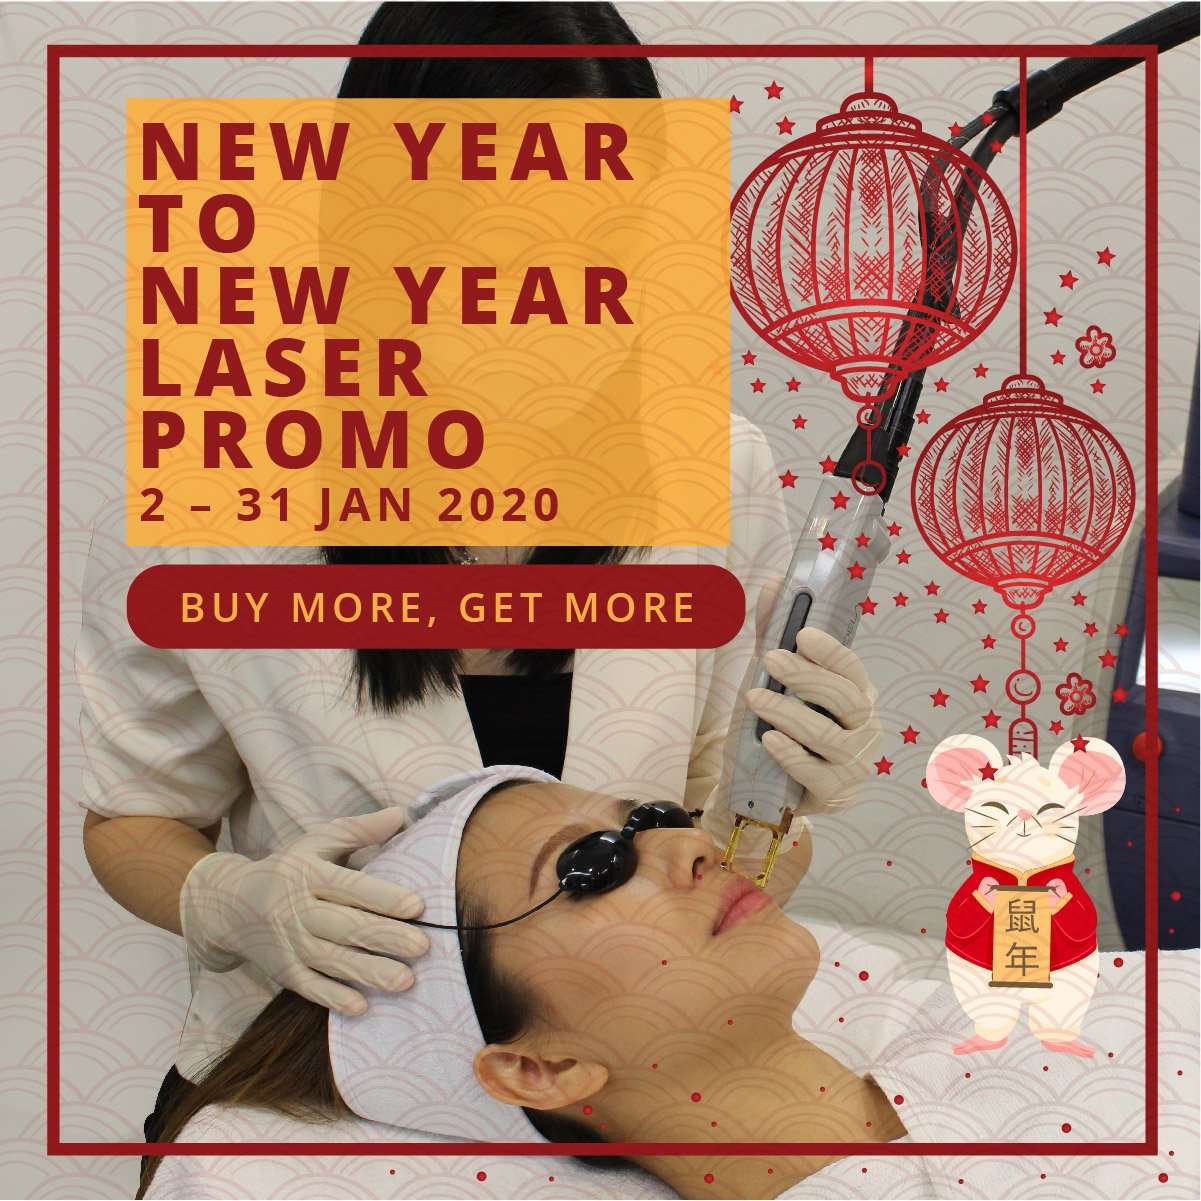 New Year to New Year Promo